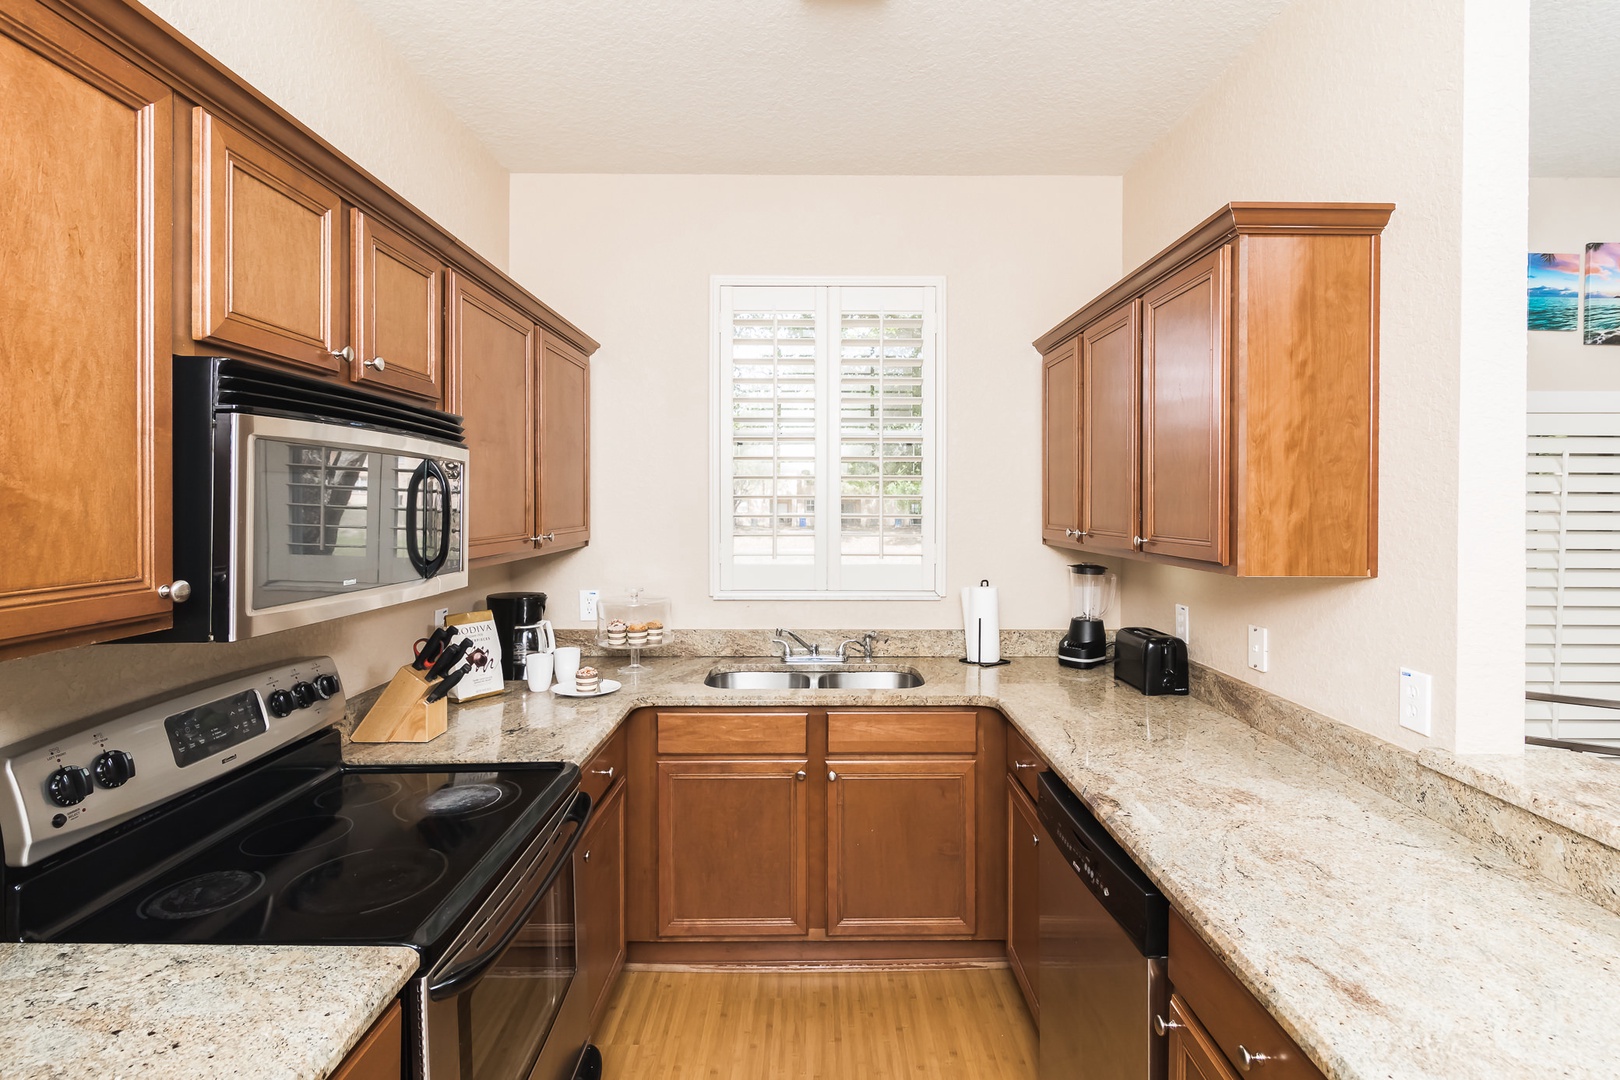 Kitchen equipped with stainless steel appliances and extra items